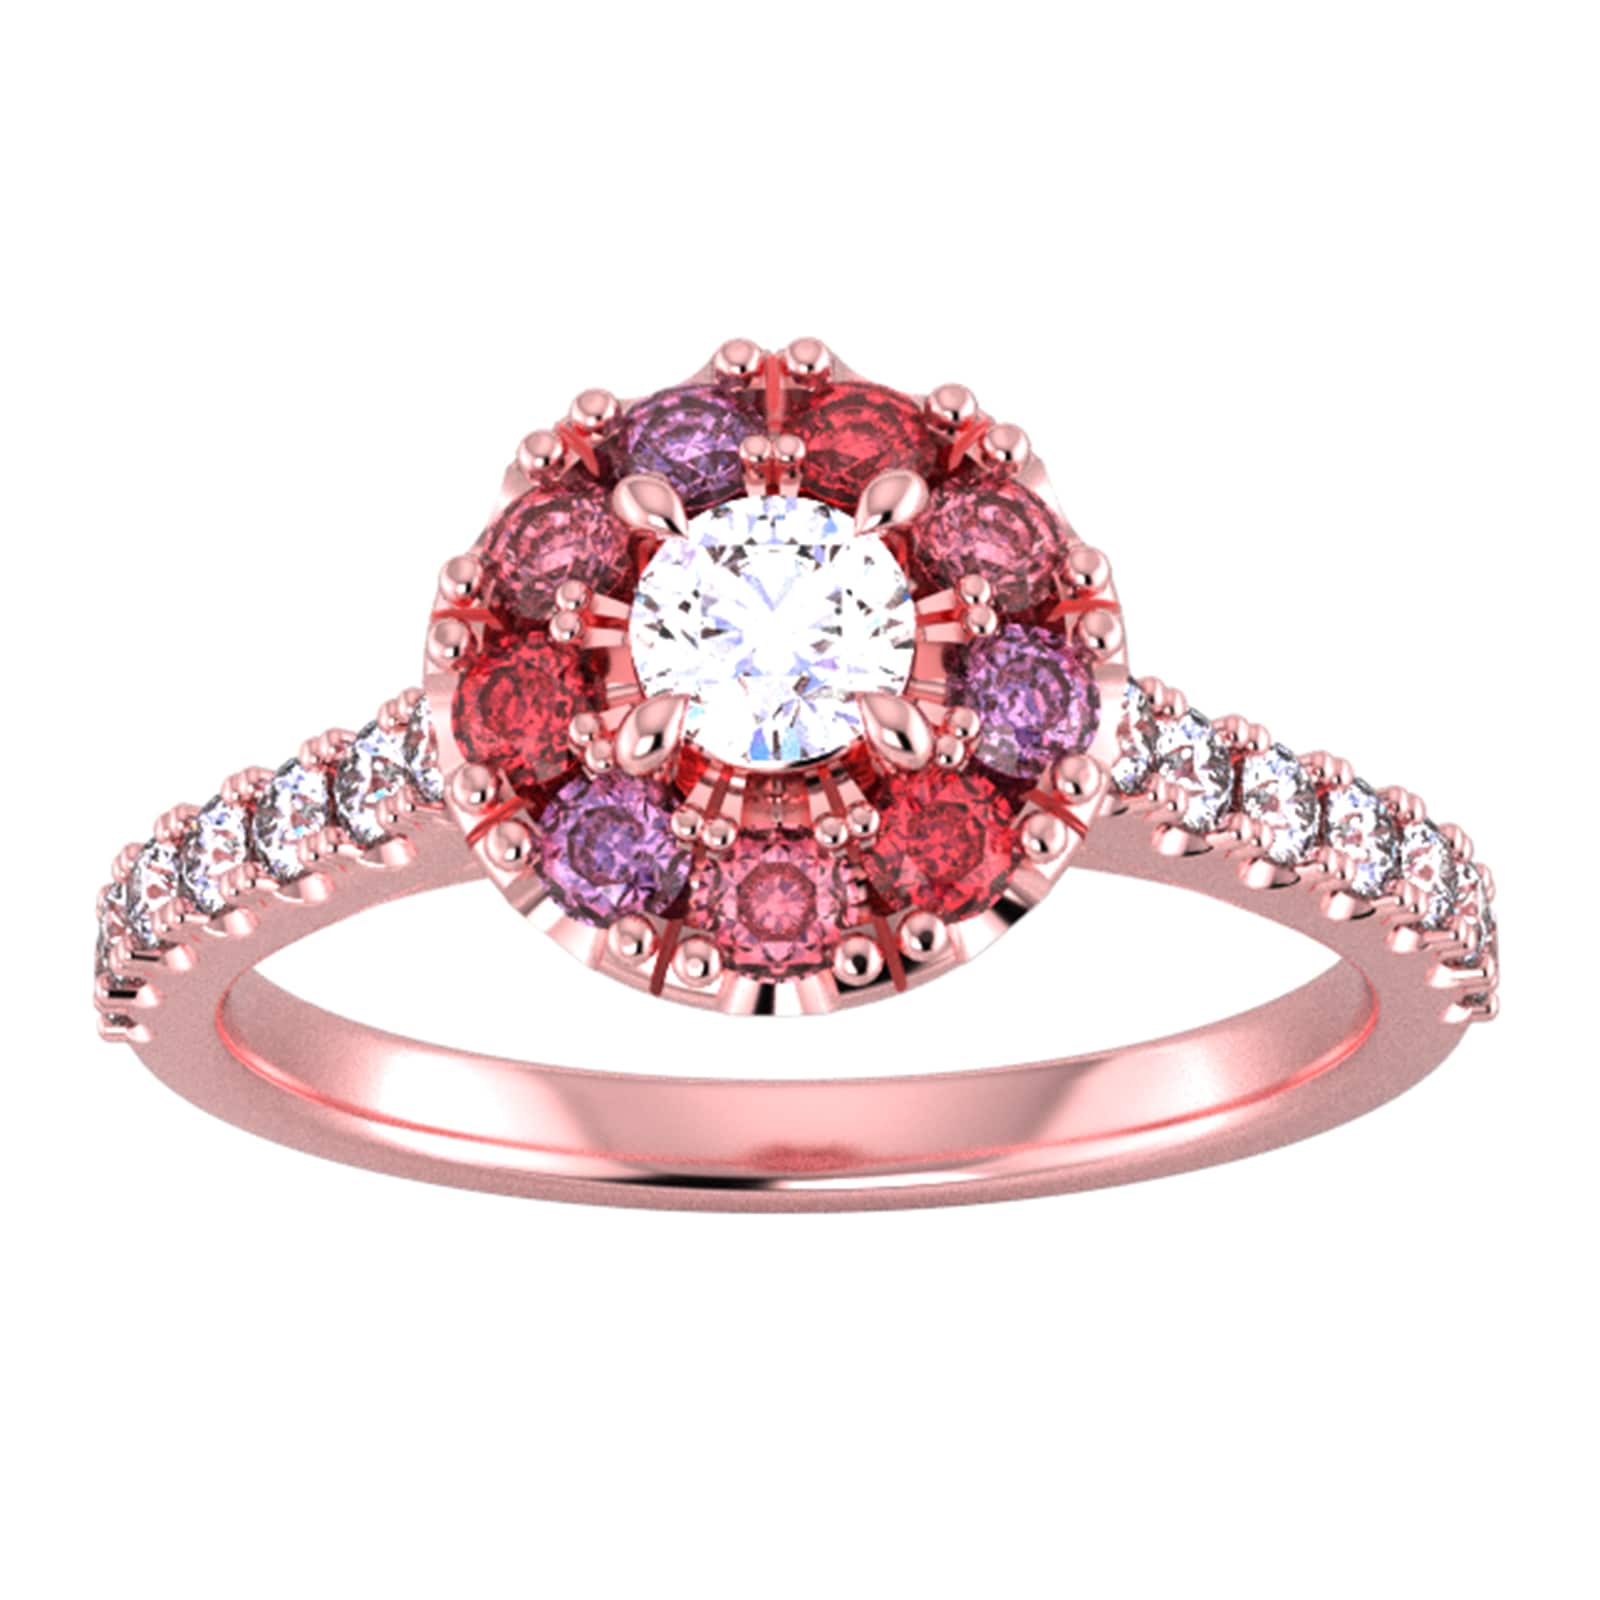 9ct Rose Gold Diamond & Red, Pink, Purple Sapphire Halo Ring - Ring Size M